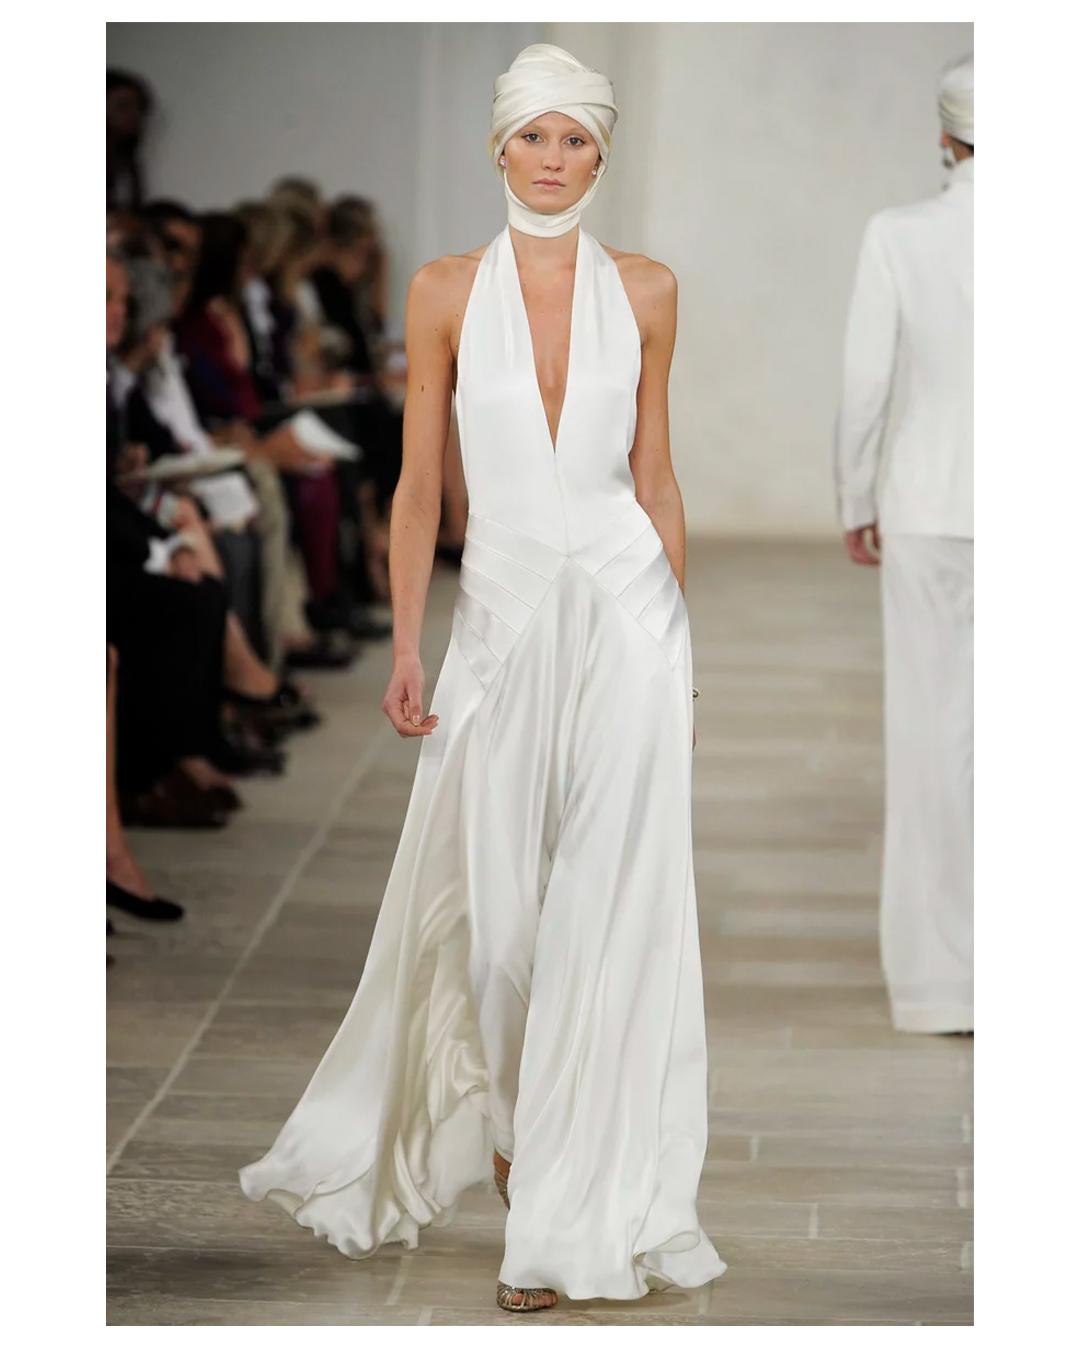 LOVE LALI VINTAGE

An incredibly rare gown by Ralph Lauren Collection Purple label S/S 2009
Called the Fabienne dress
The most beautiful halter neck gown in ivory silk with a plunging neckline and low cut back. This would work wonderfully for a